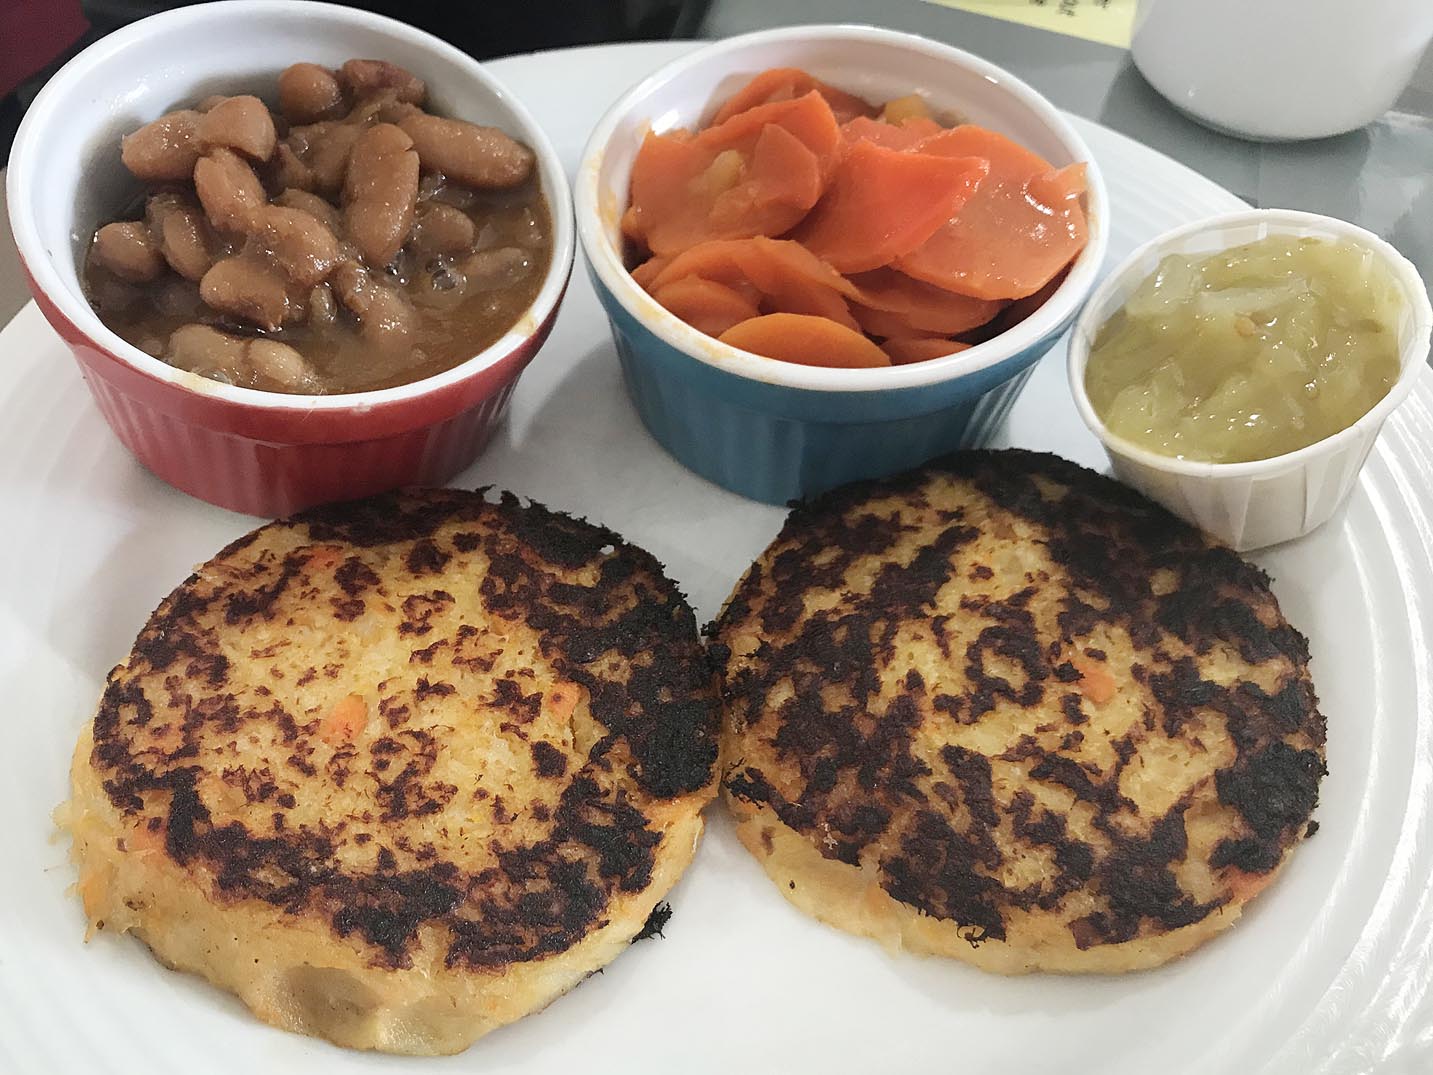 Acadian fish cakes with baked beans, chow-chow, and carrots in Nova Scotia.